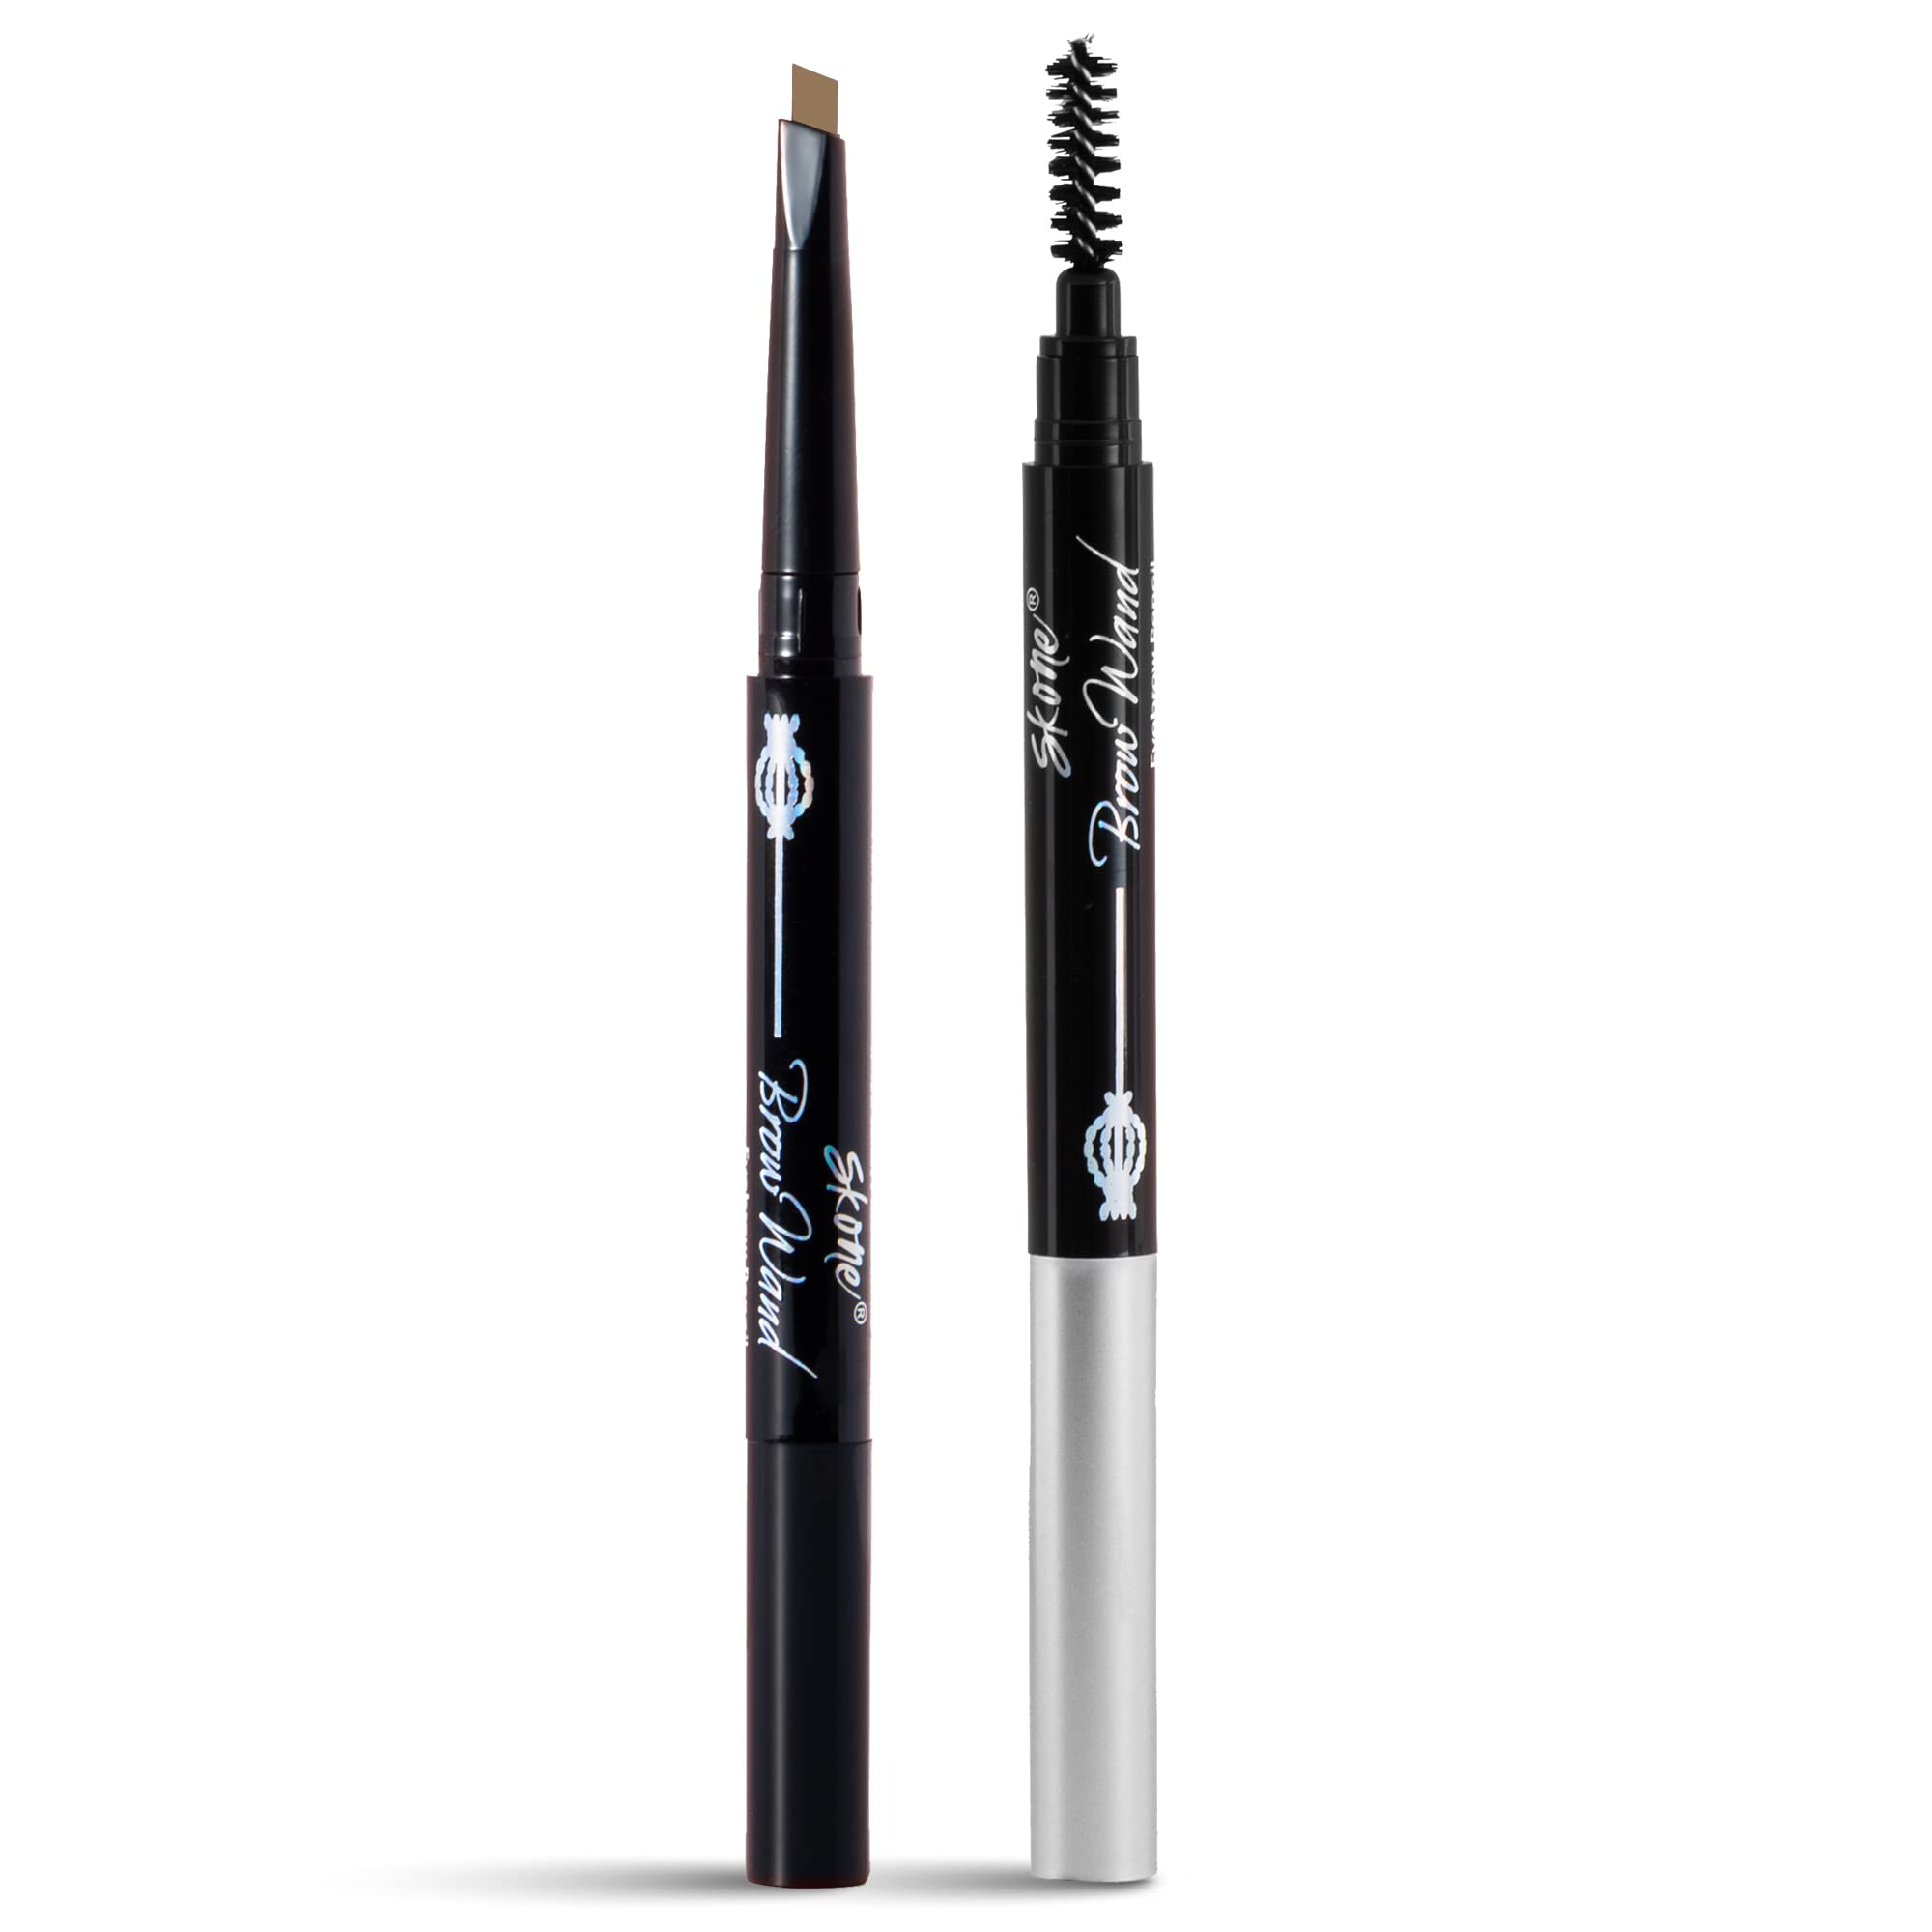 Skone Cosmetics Brow Wand Eyebrow Pencil - Retractable Brow Pencil with  Brow Brush, Long Lasting, Smudge Proof, Waterproof Eyebrow Makeup Pencil  Liner Pen - Creamy Chai for Platinum Blondes/Gray Hair